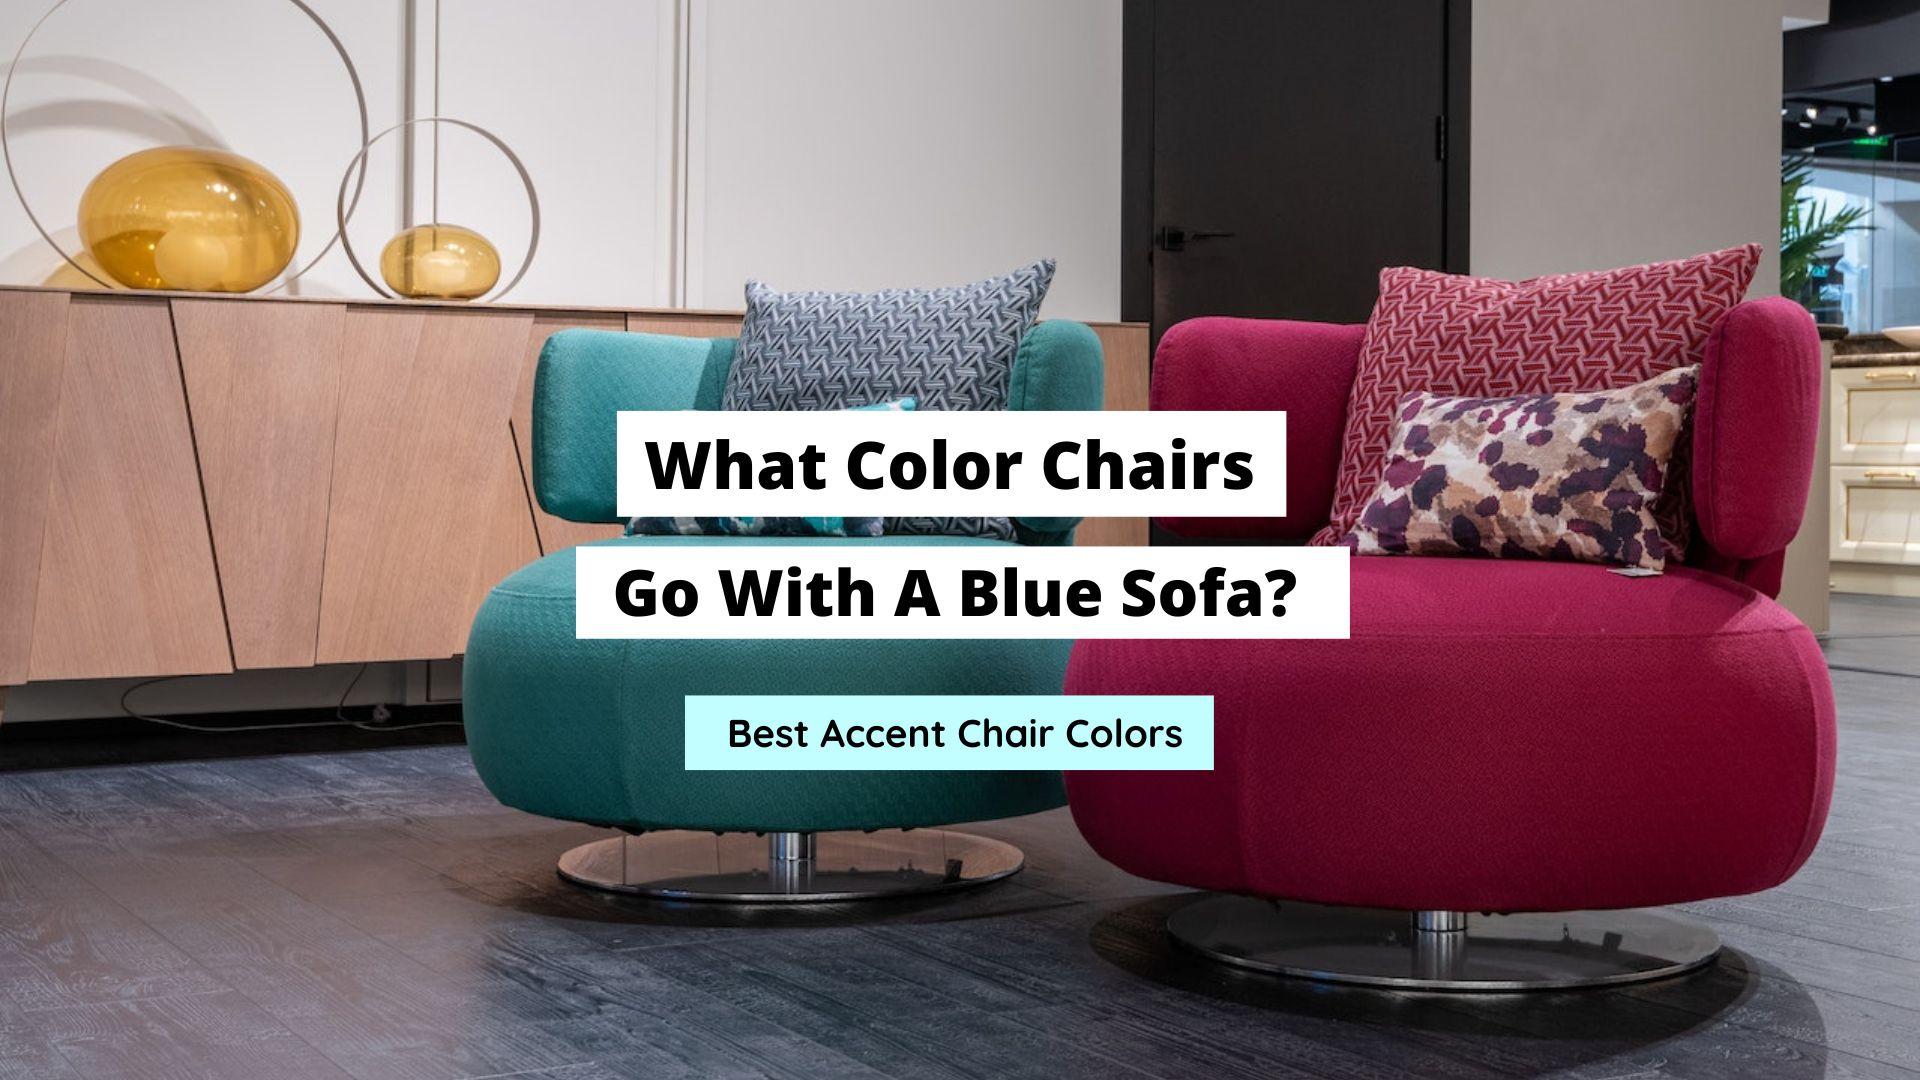 What Color Chairs Go With A Blue Sofa? (Best Colors) - Craftsonfire